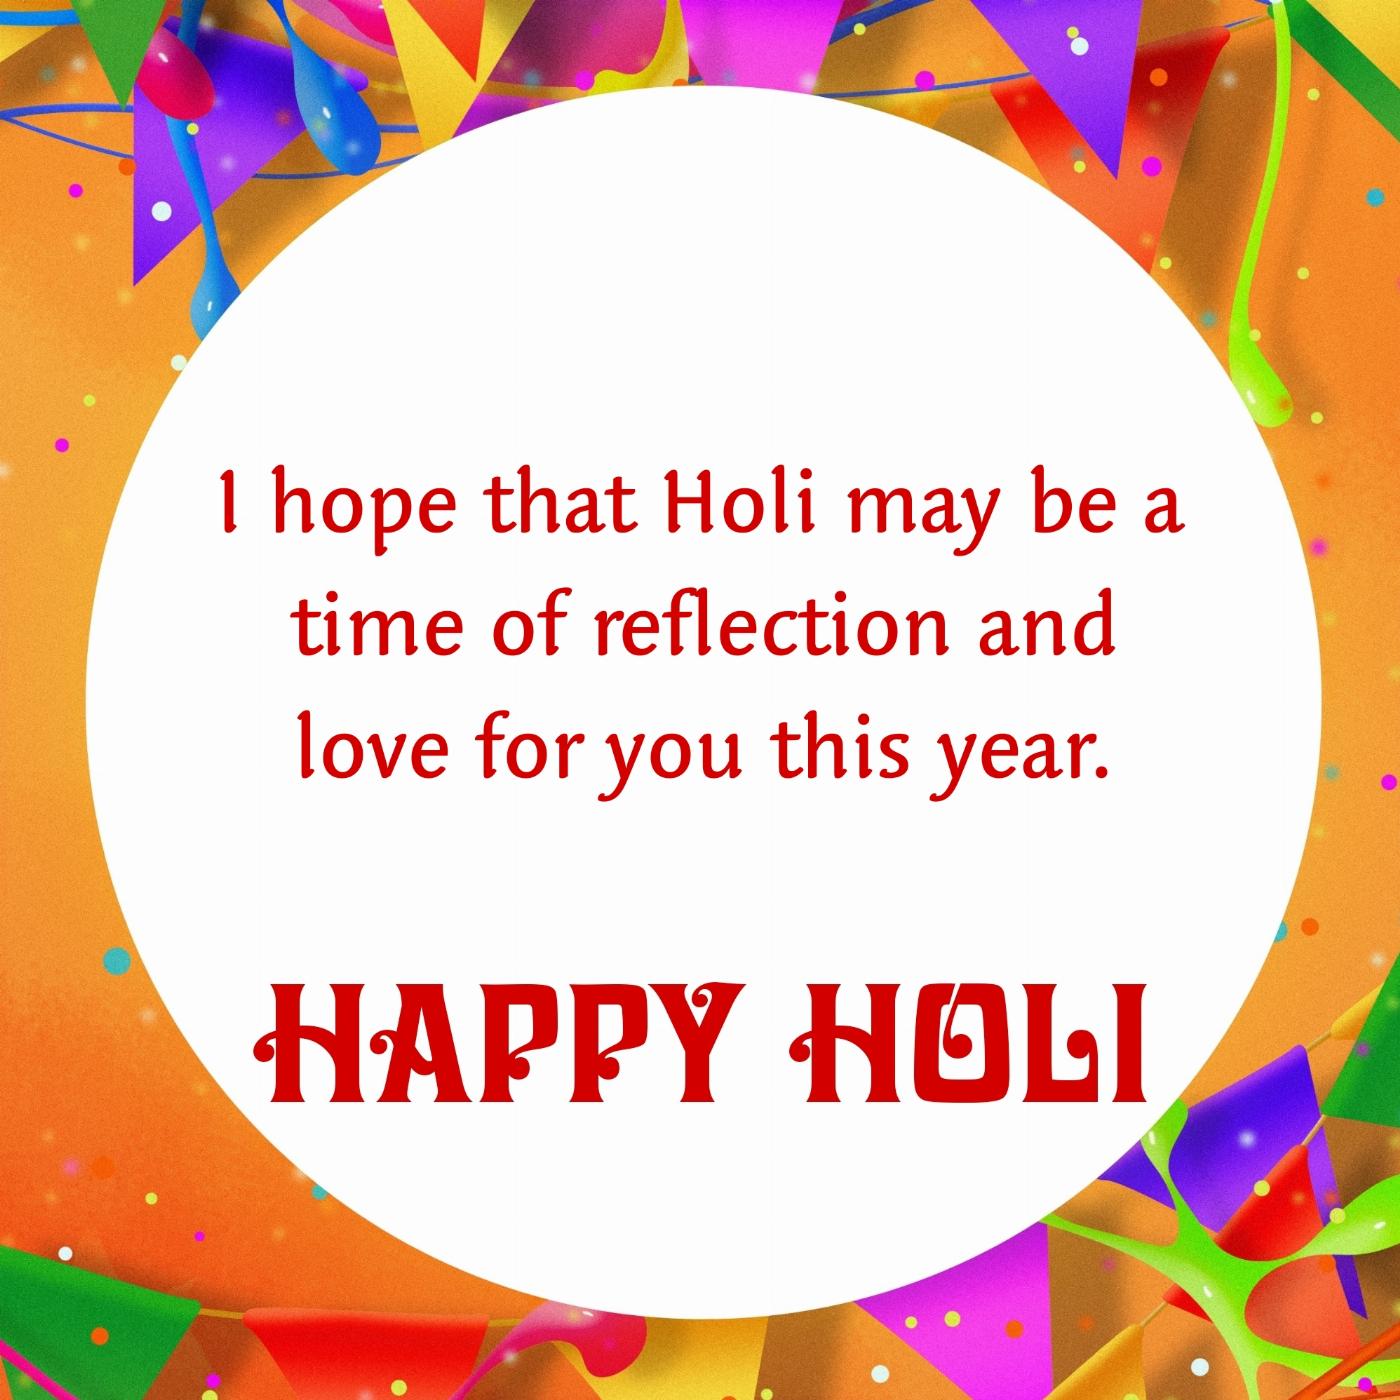 I hope that Holi may be a time of reflection and love for you this year